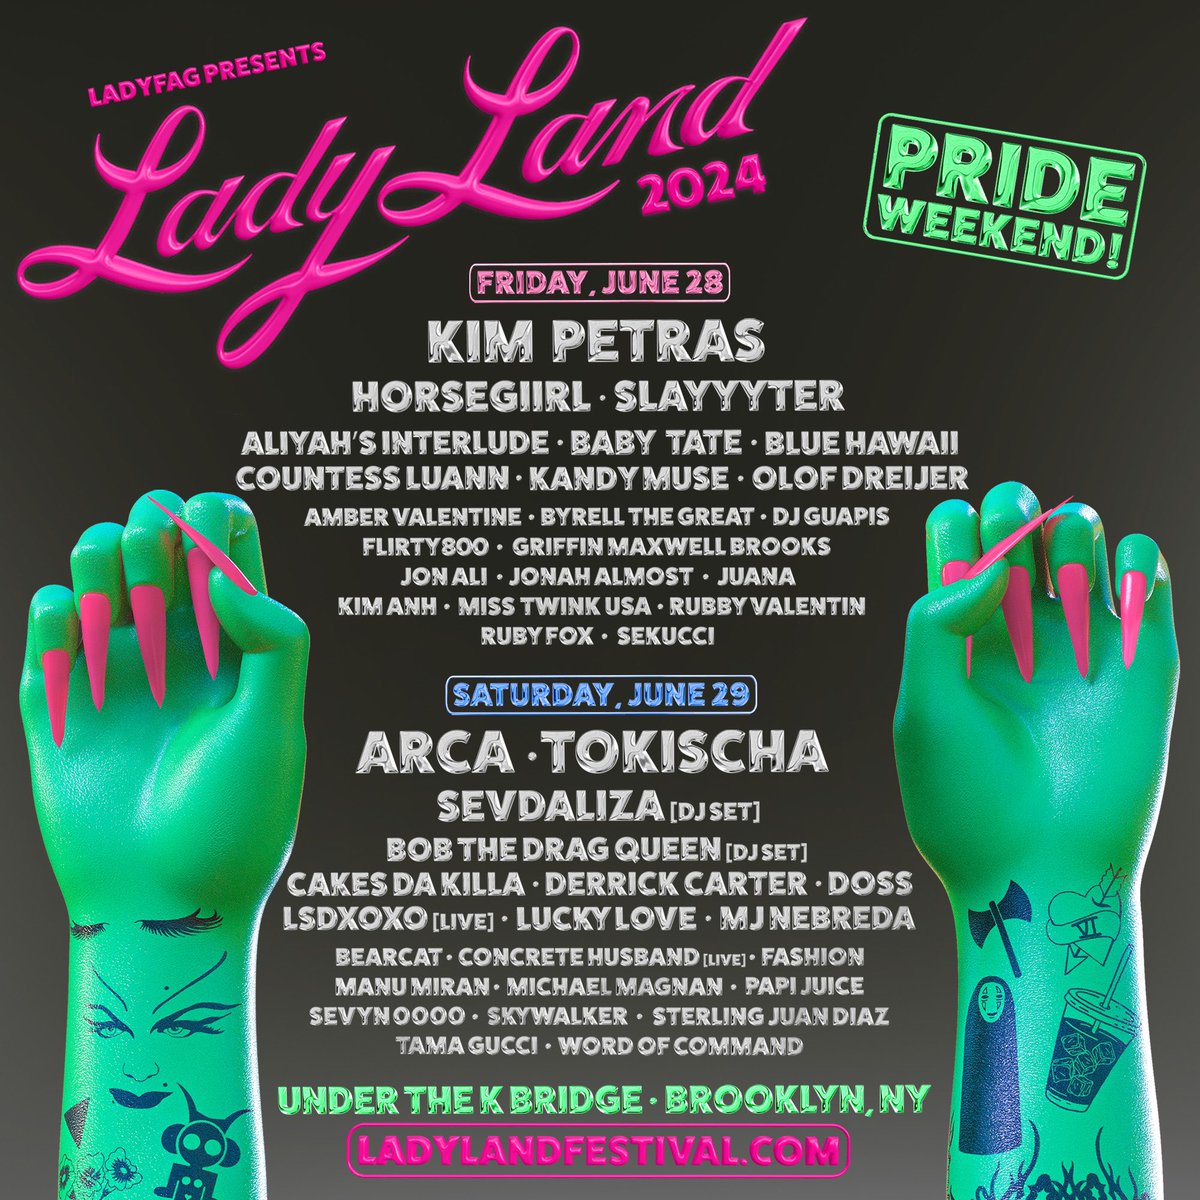 Ladies and gentlemen, this is the Countess speaking: presale for @LadyLandFest is now live! Get your tickets at ladylandfestival.com 🏳️‍🌈🏳️‍🌈🏳️‍🌈